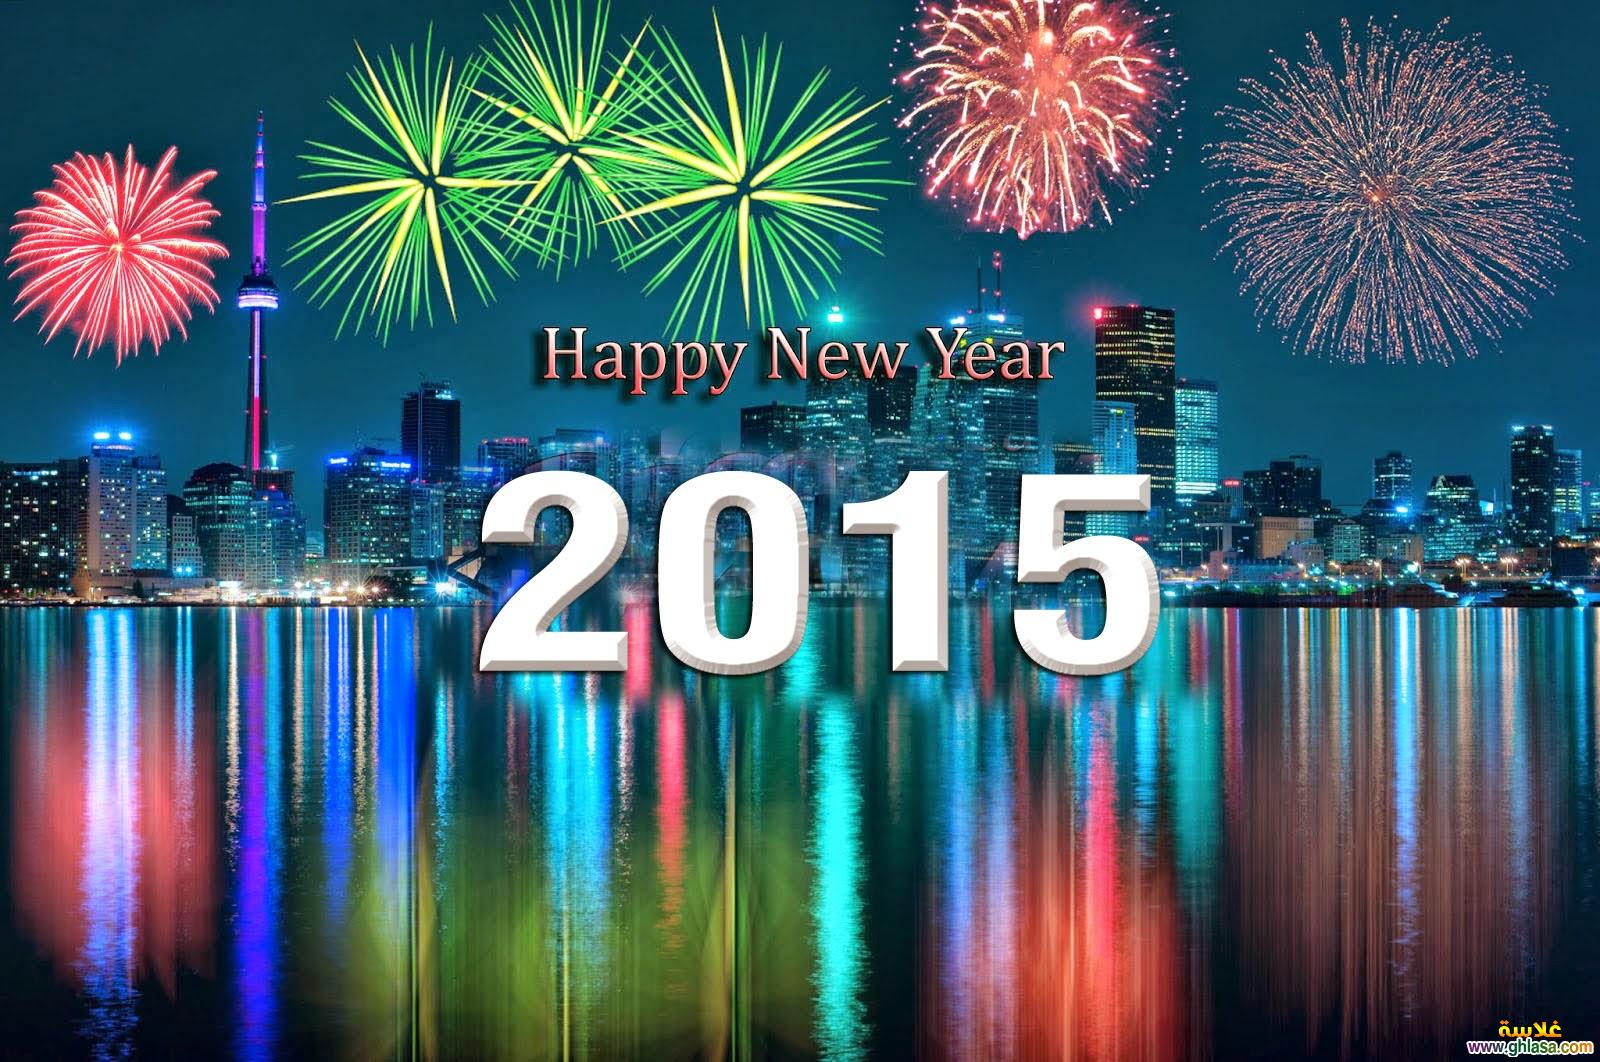 Happy_New_Year_2022 ،صور عام سعيد 2022 ، صور2022 do.php?img=40091